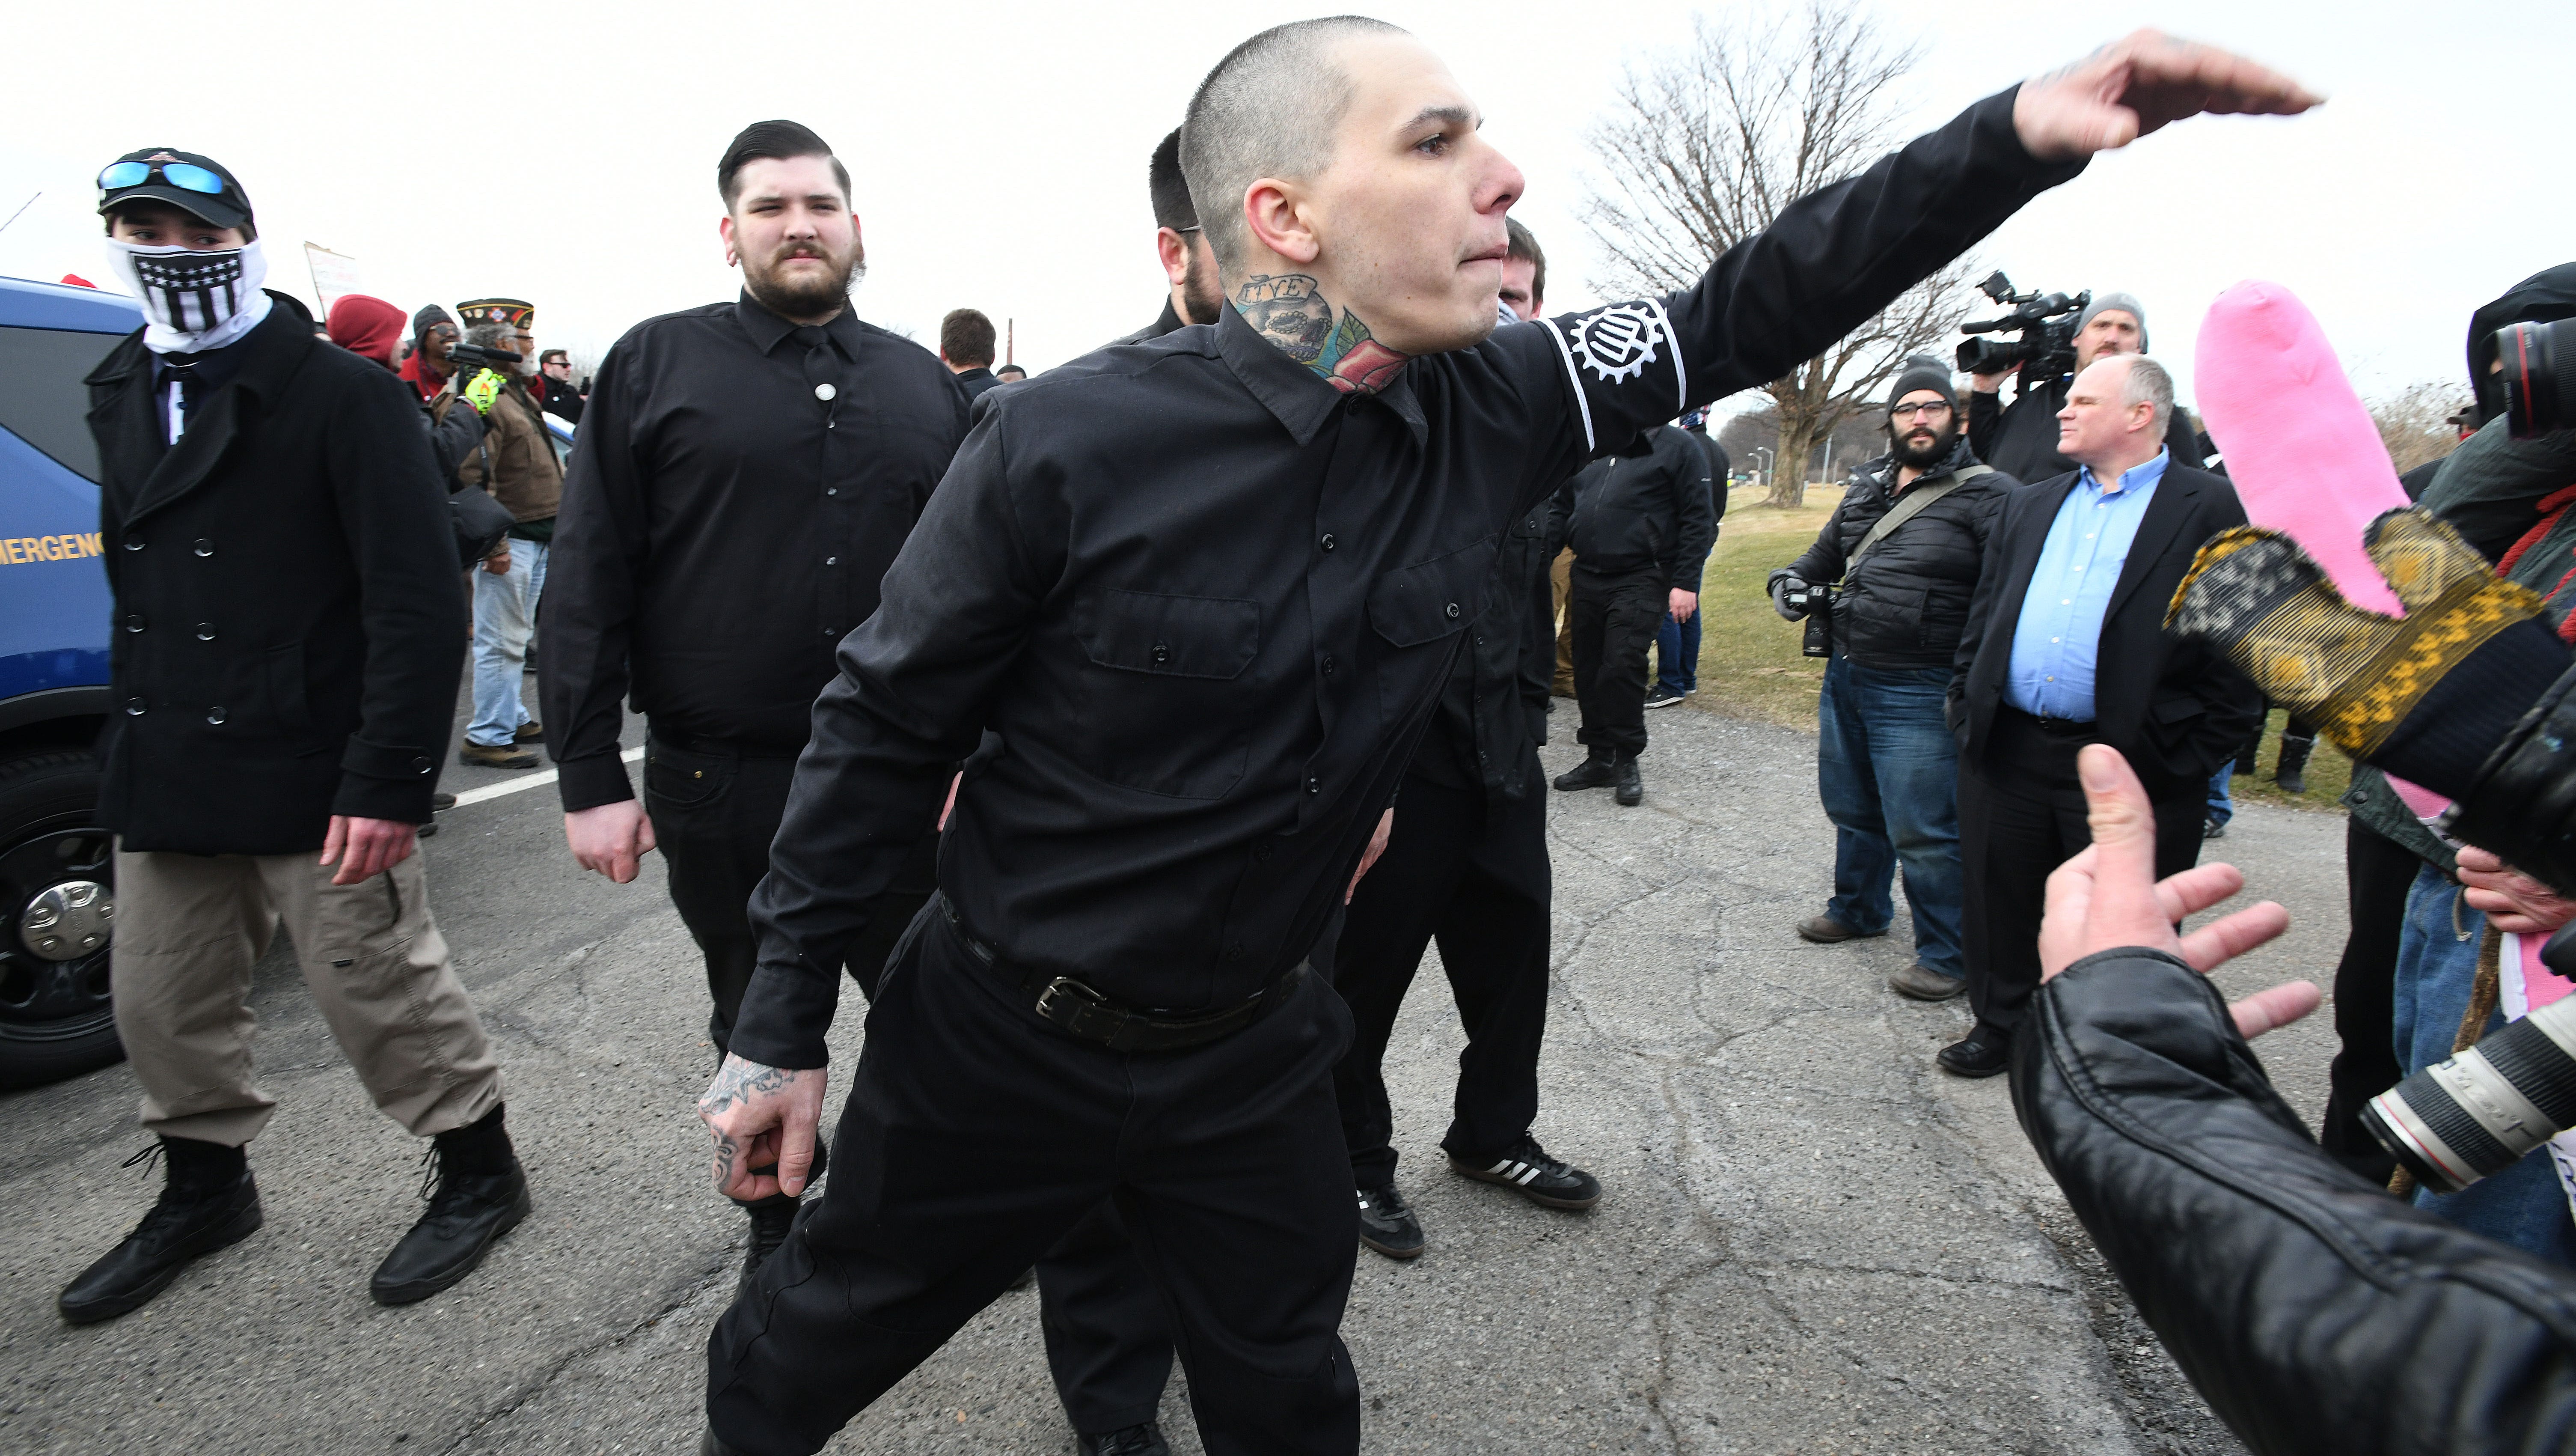 A pro-Spencer member of the white-supremacist TWP, wearing the four pronged pitchfork on his armband, clashes with protesters outside the Richard Spencer speech.